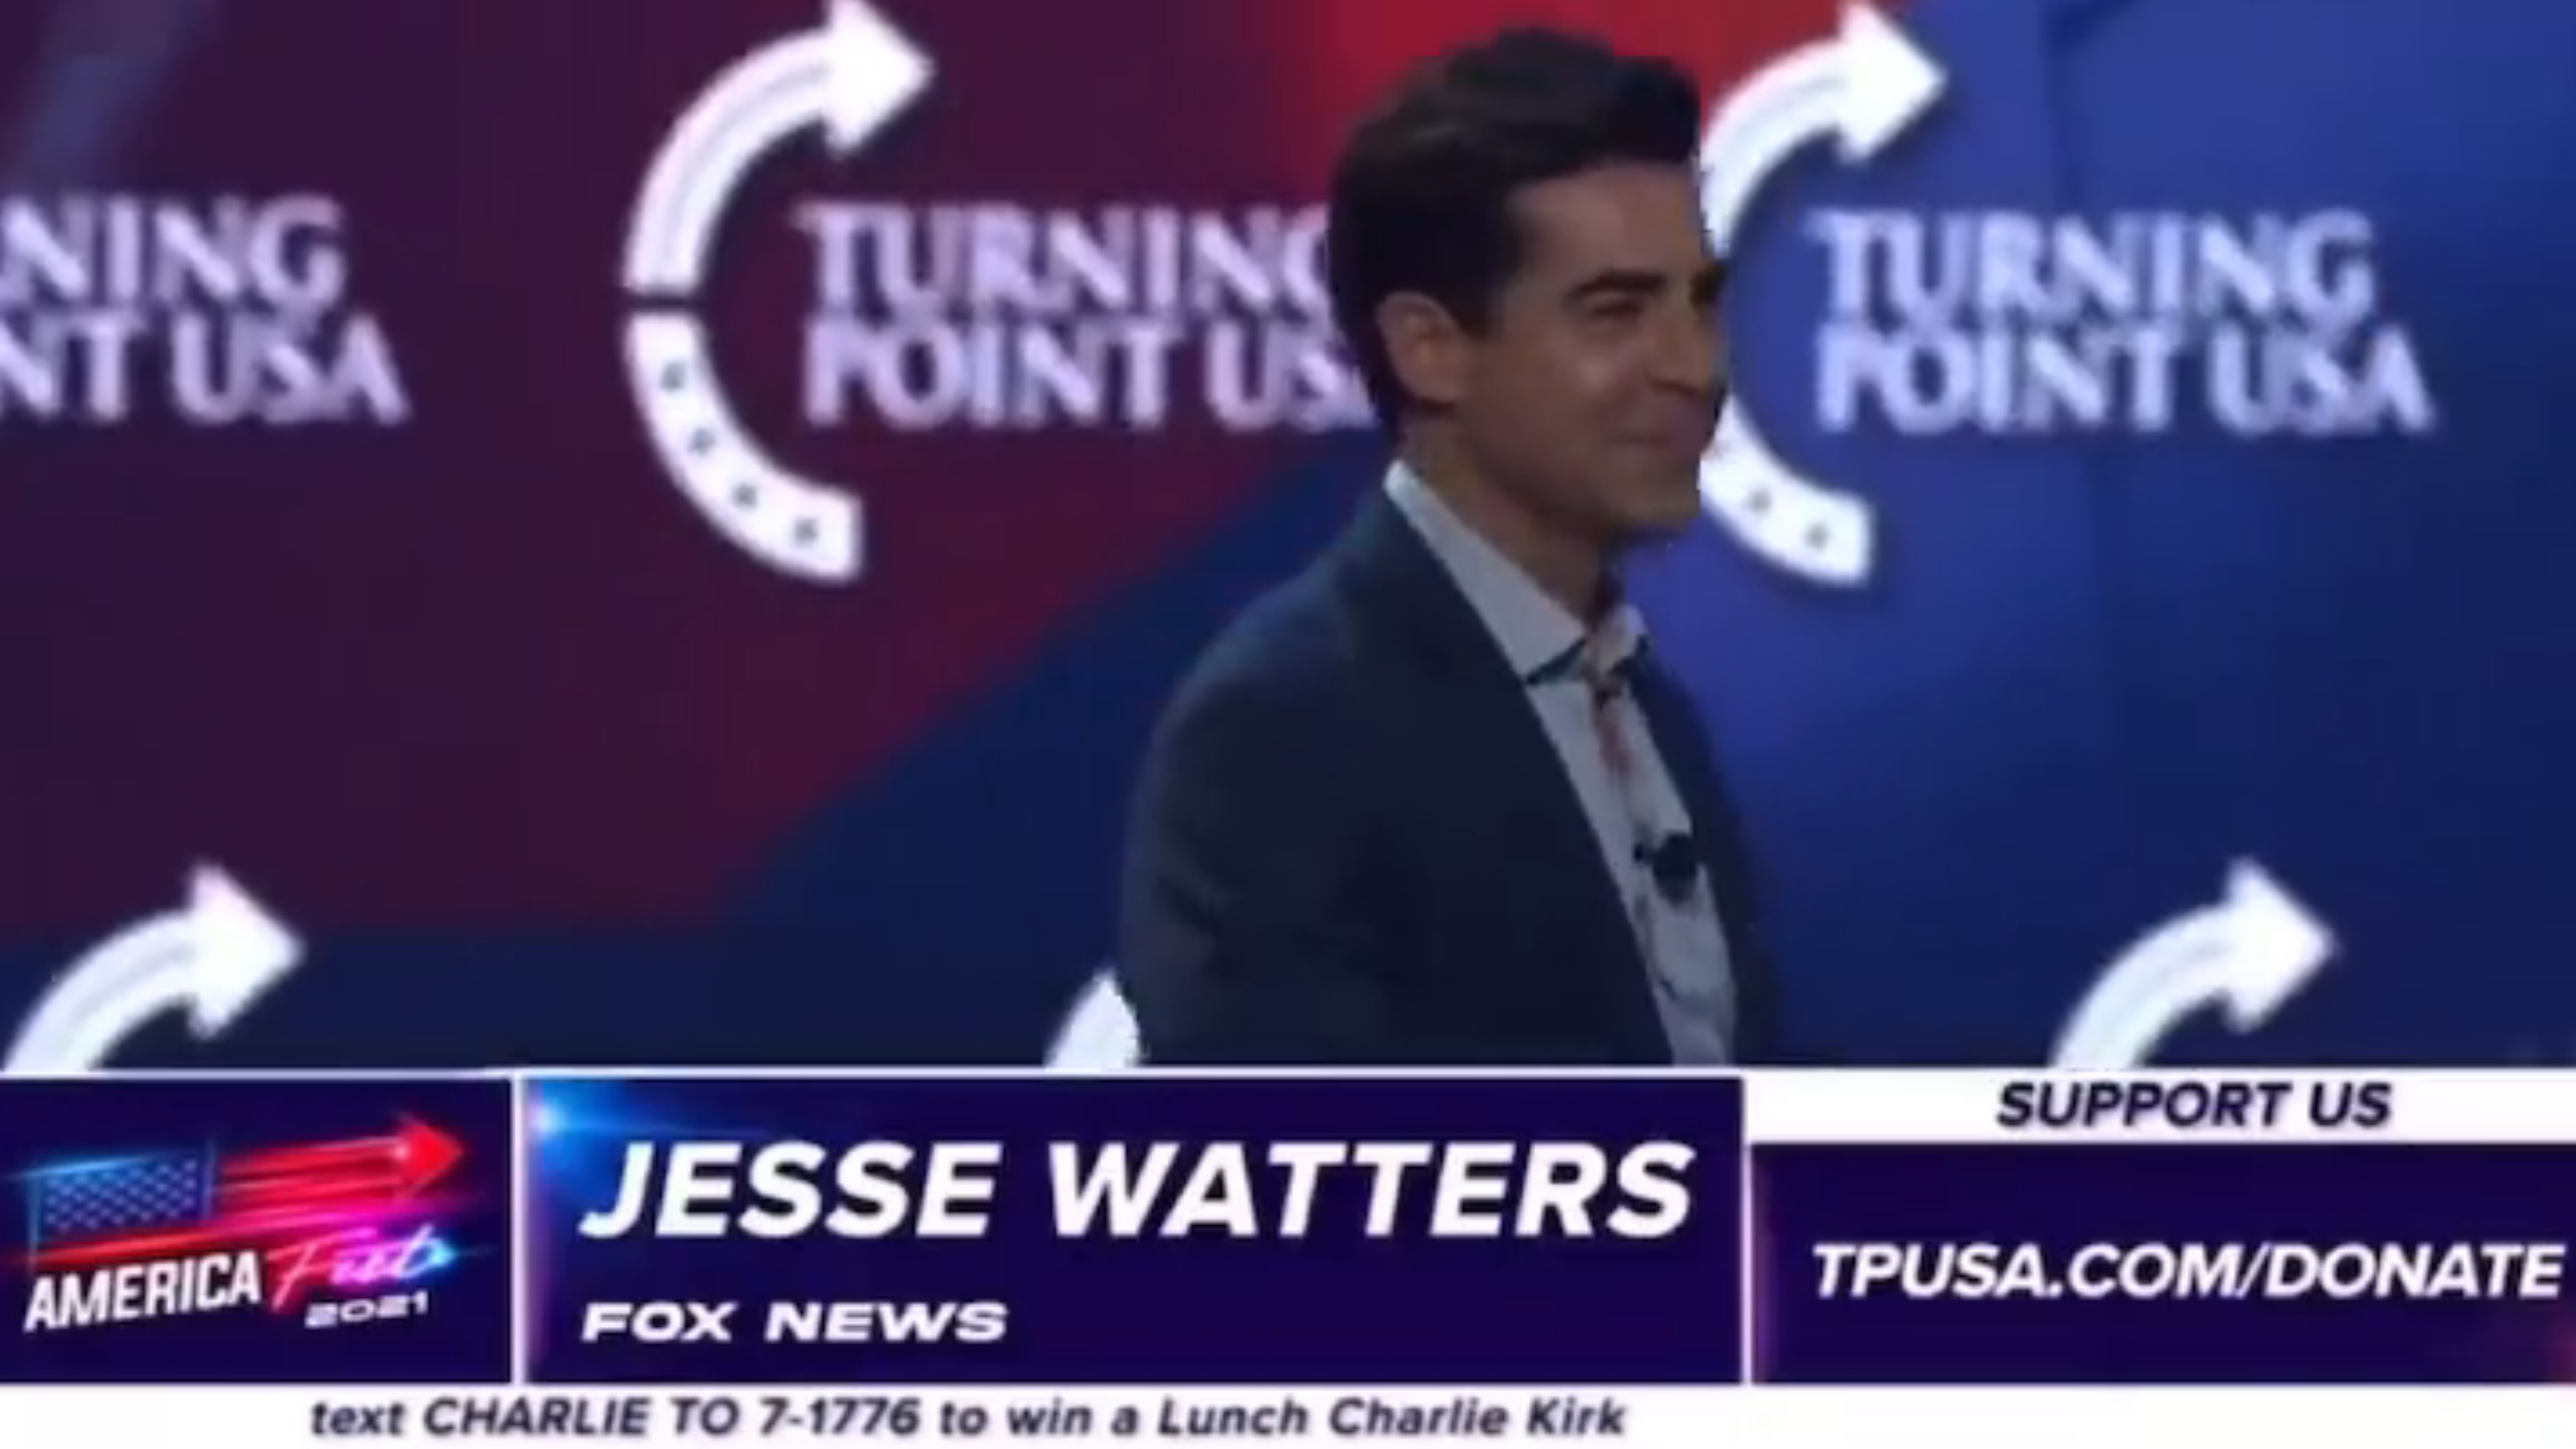 Fox News entertainer Jesse Watters calls for the assassination of Dr. Anthony Fauci at Turning Point USA’s AmericaFest conference on 20 December 2021. Watters encouraged his supporters to ‘ambush’ the infectious-disease expert with a ‘kill shot’. Fox News had no comment. Photo: Ron Filipkowski / Twitter